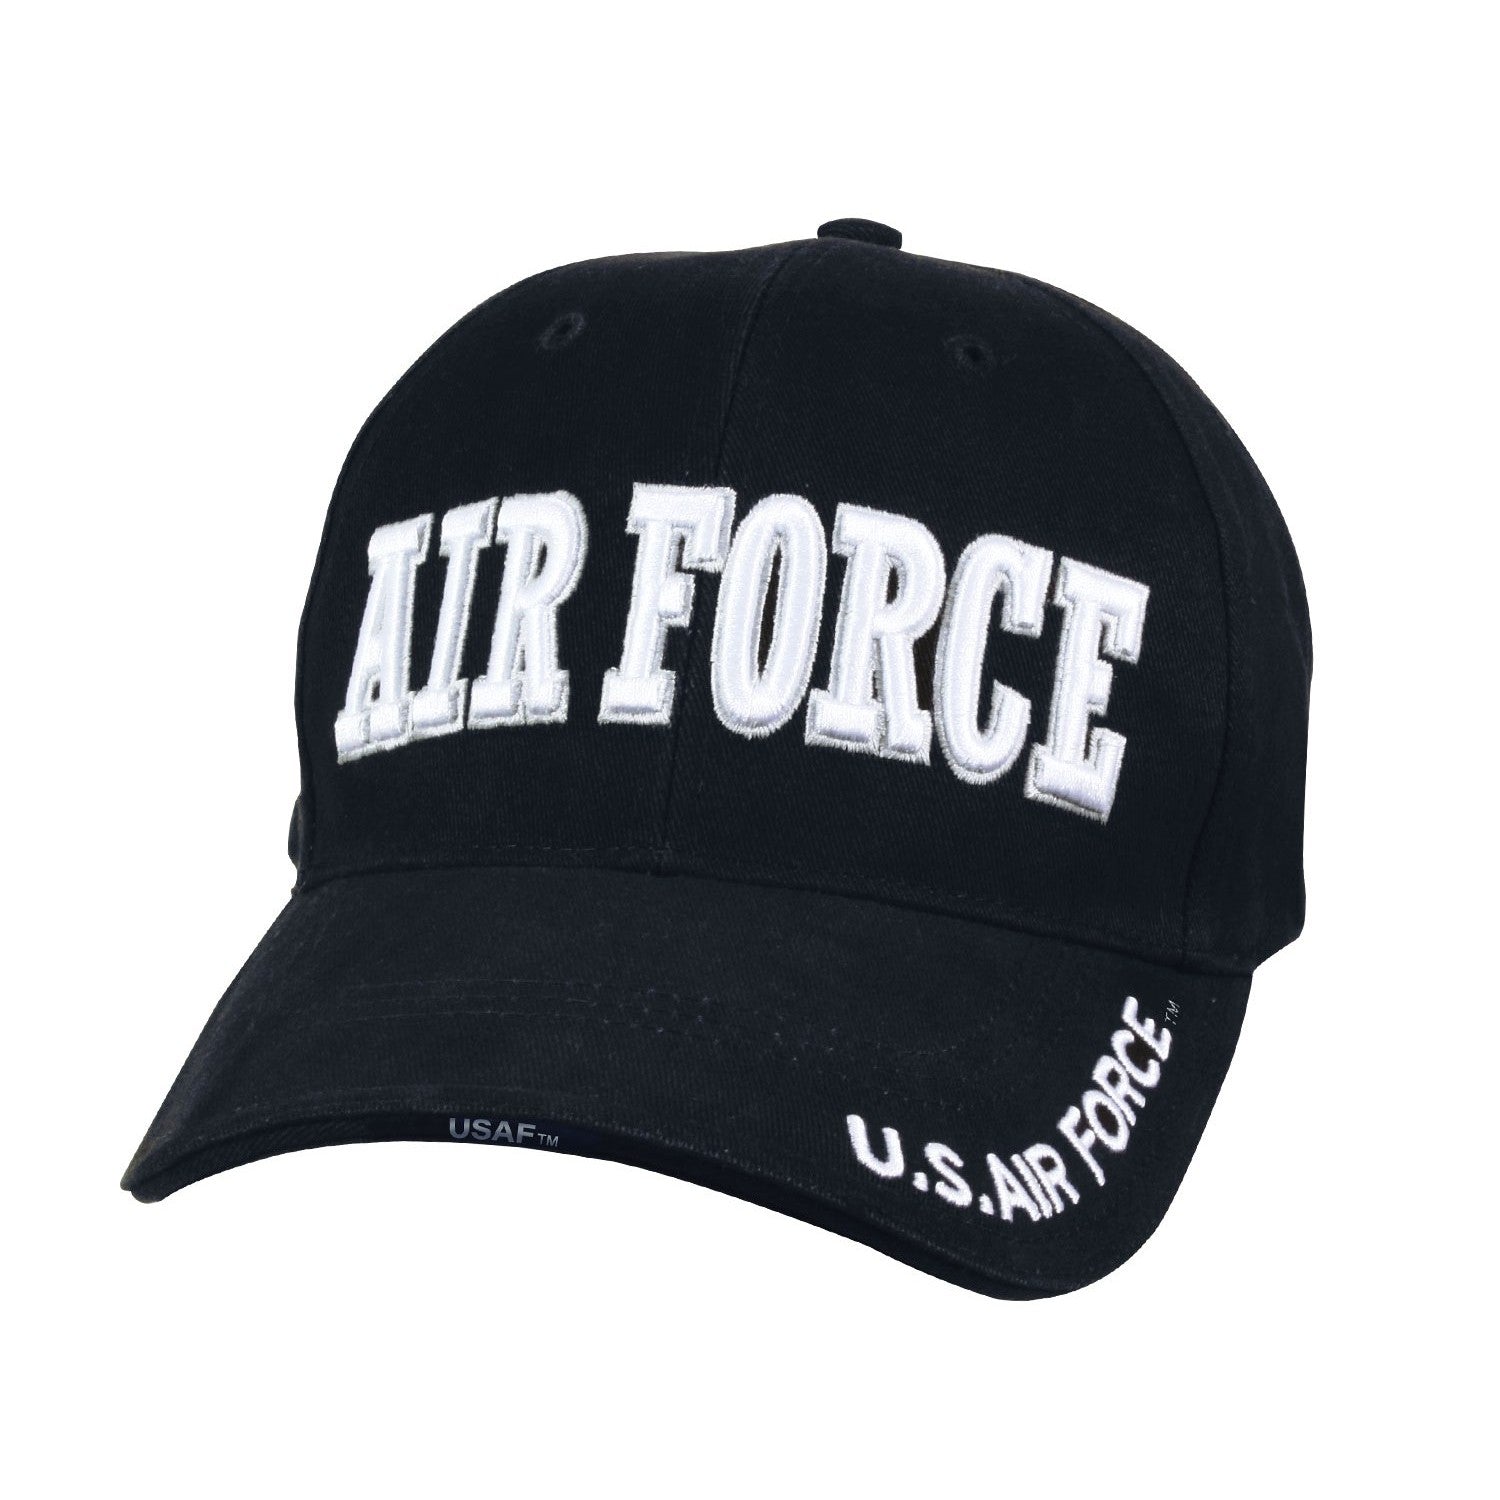 3D Embroidered Air Force Text Hat Navy Blue